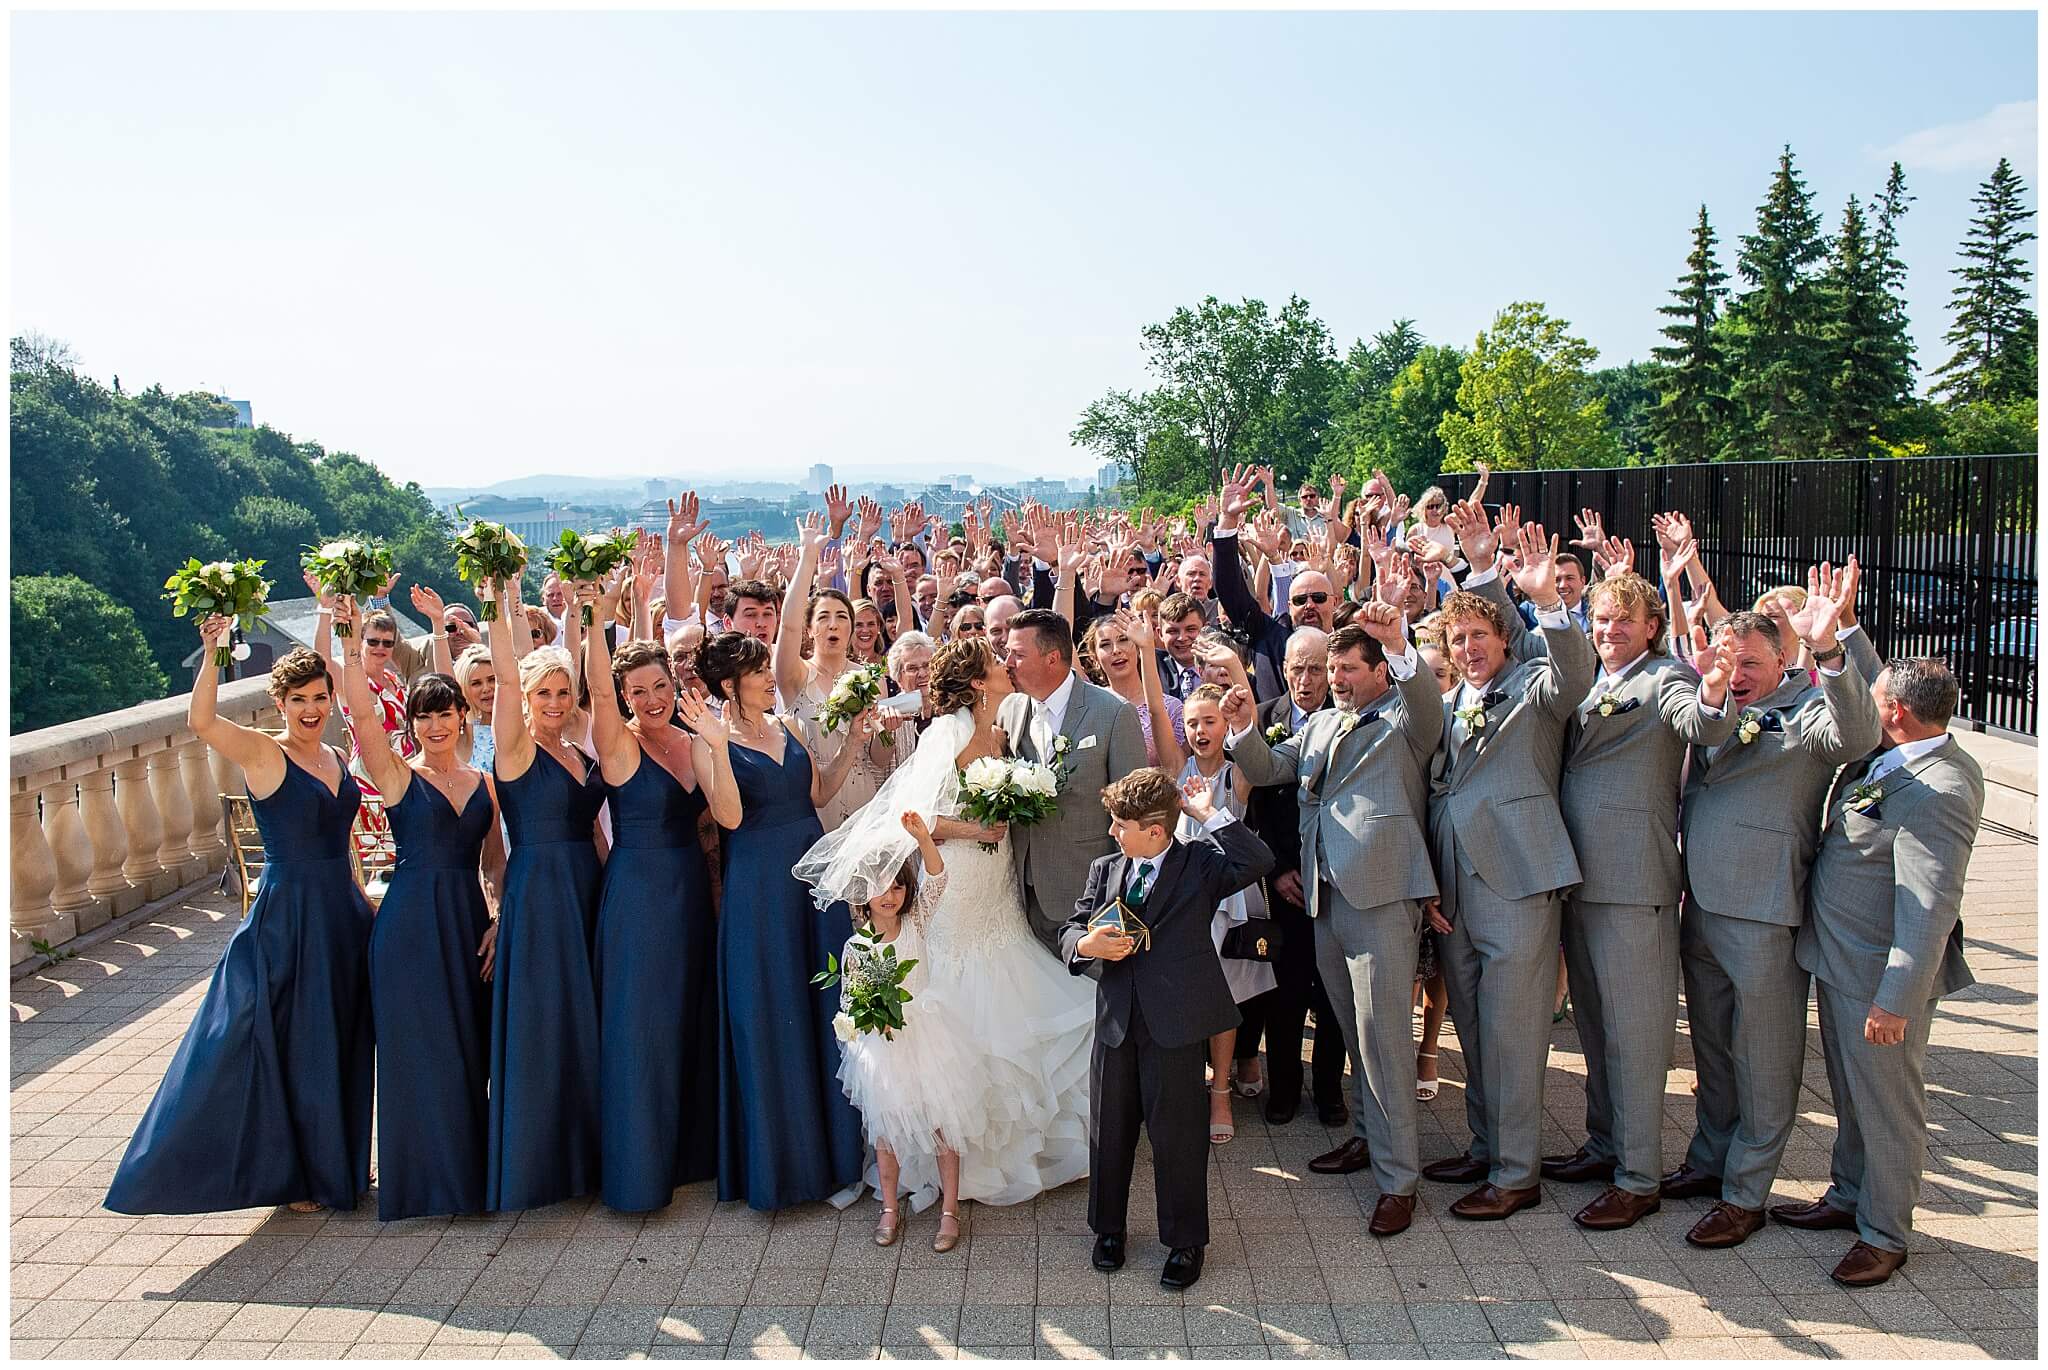 a large group photo of a bride and groom with all their guests cheering on the terrace of the Chateau Laurier hotel